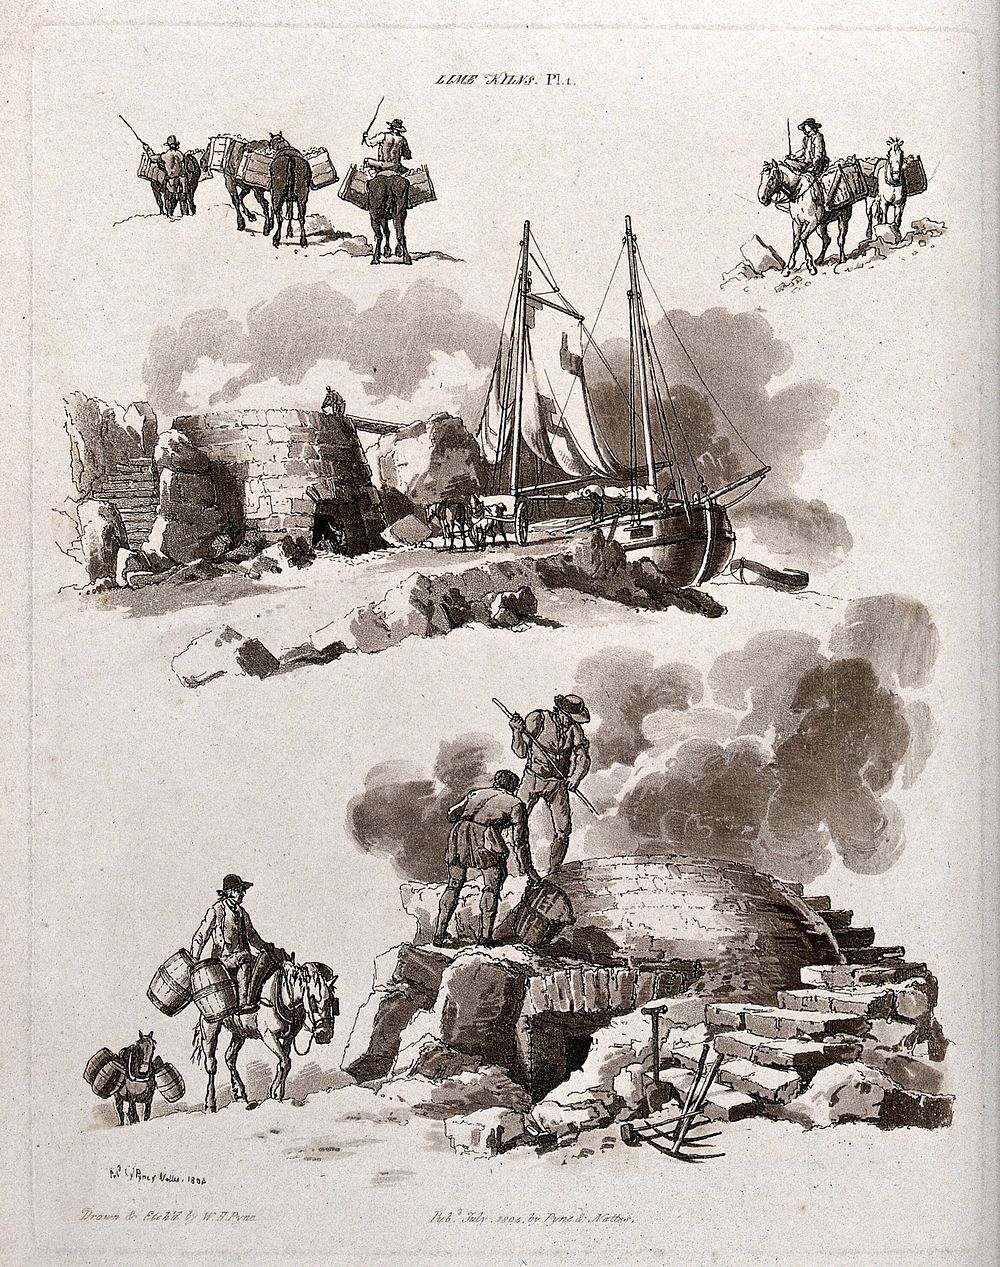 Men working in lime kilns: some are loading a boat, others are firing the kilns, and donkeys carry away loaded panniers.…